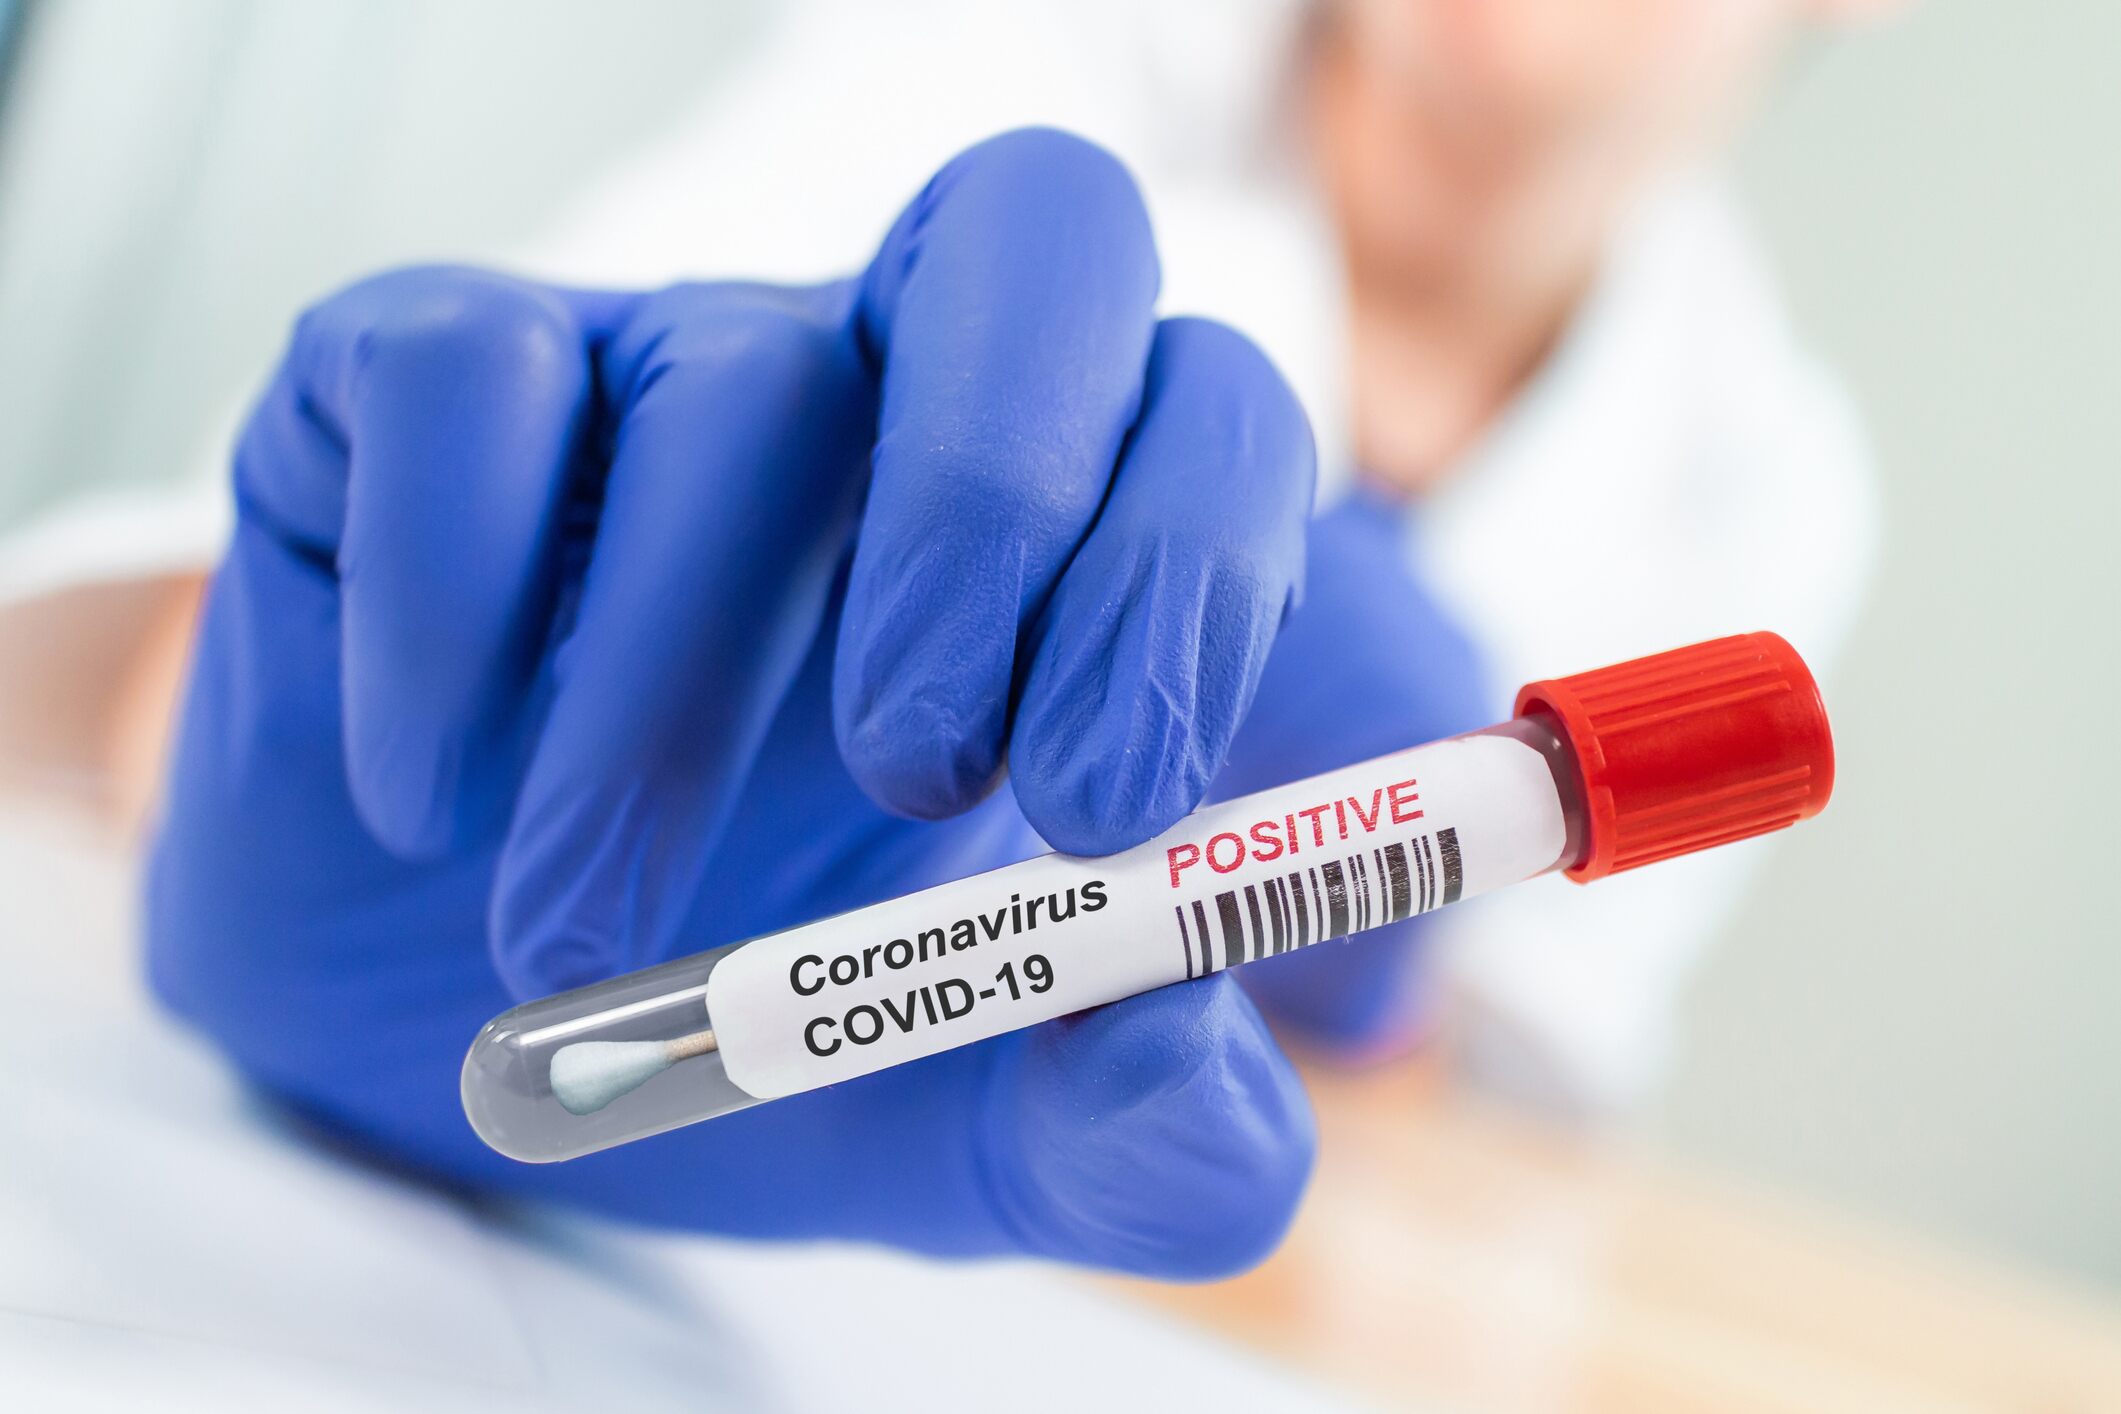 The decline in new coronavirus cases in some Midwestern states is giving signs of hope